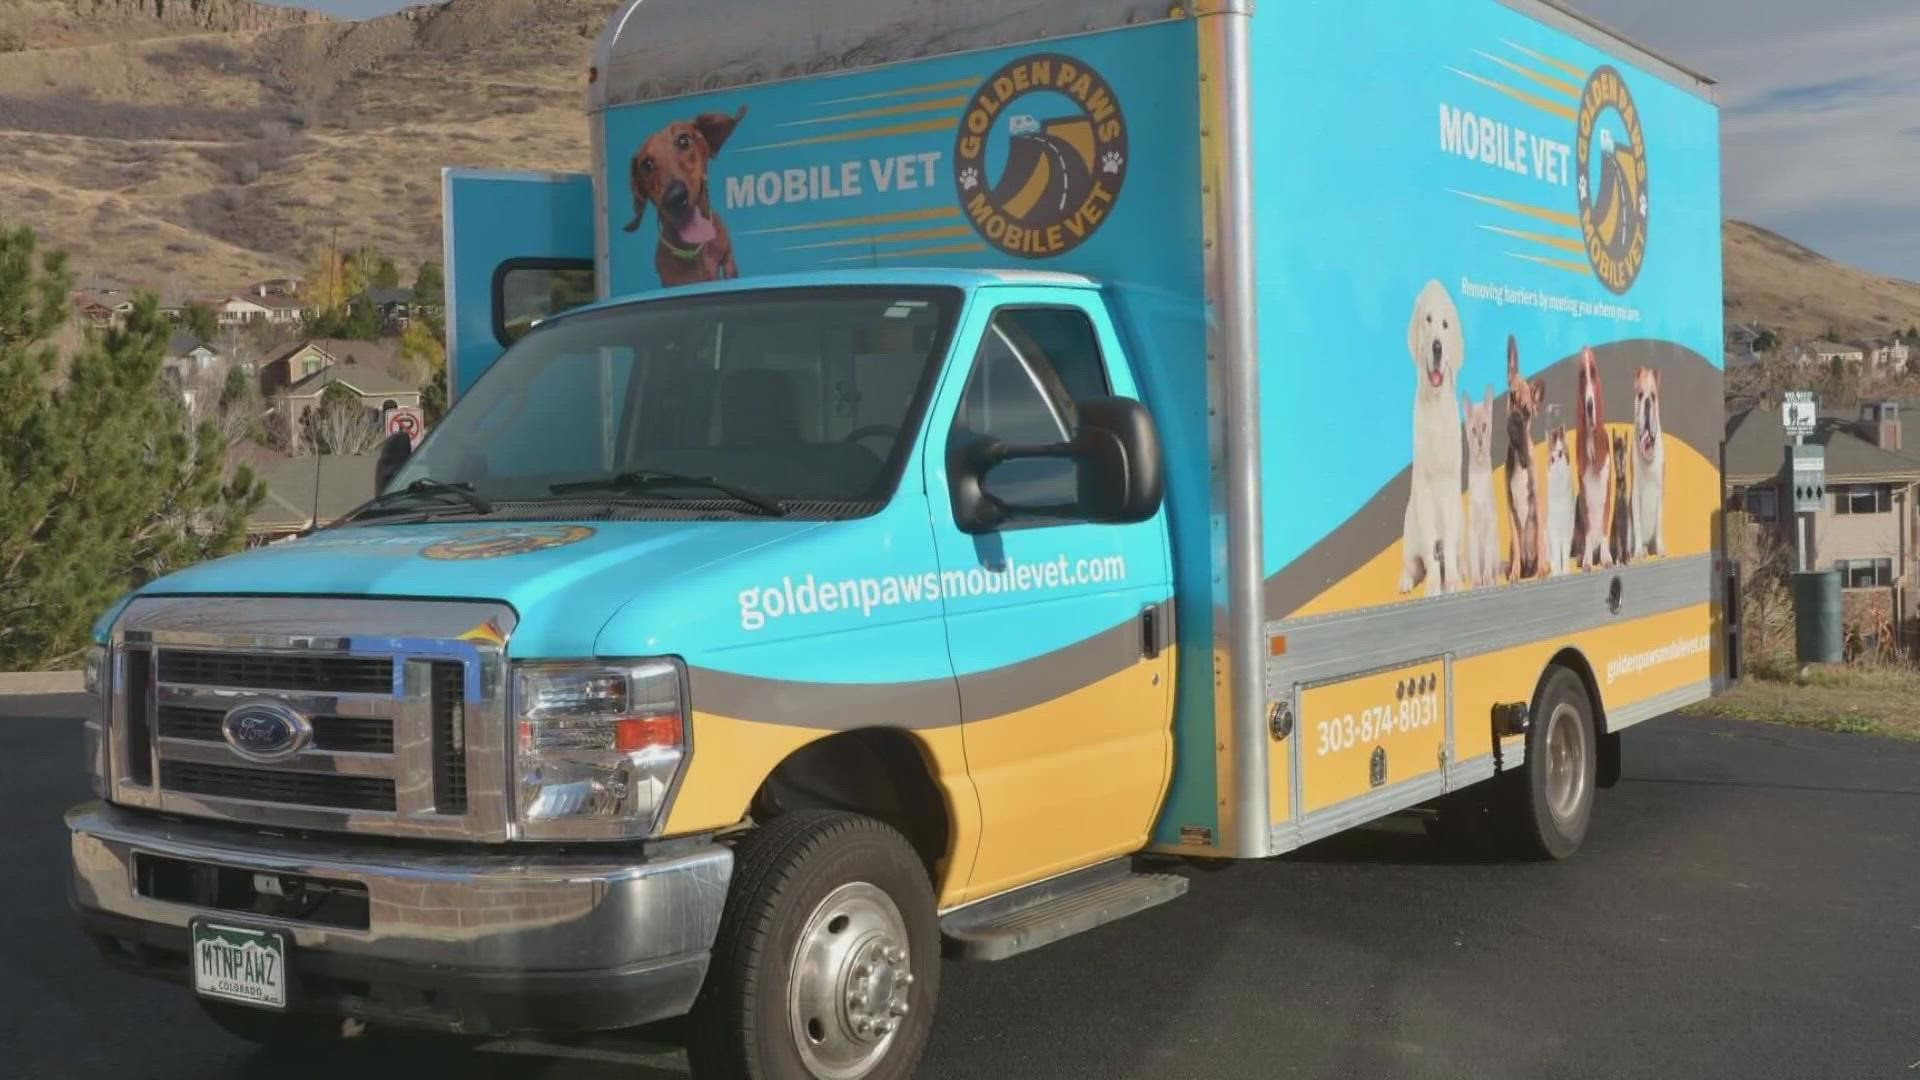 Golden Paws Animal Hospital started in 2016, but just launched their mobile vet last year.